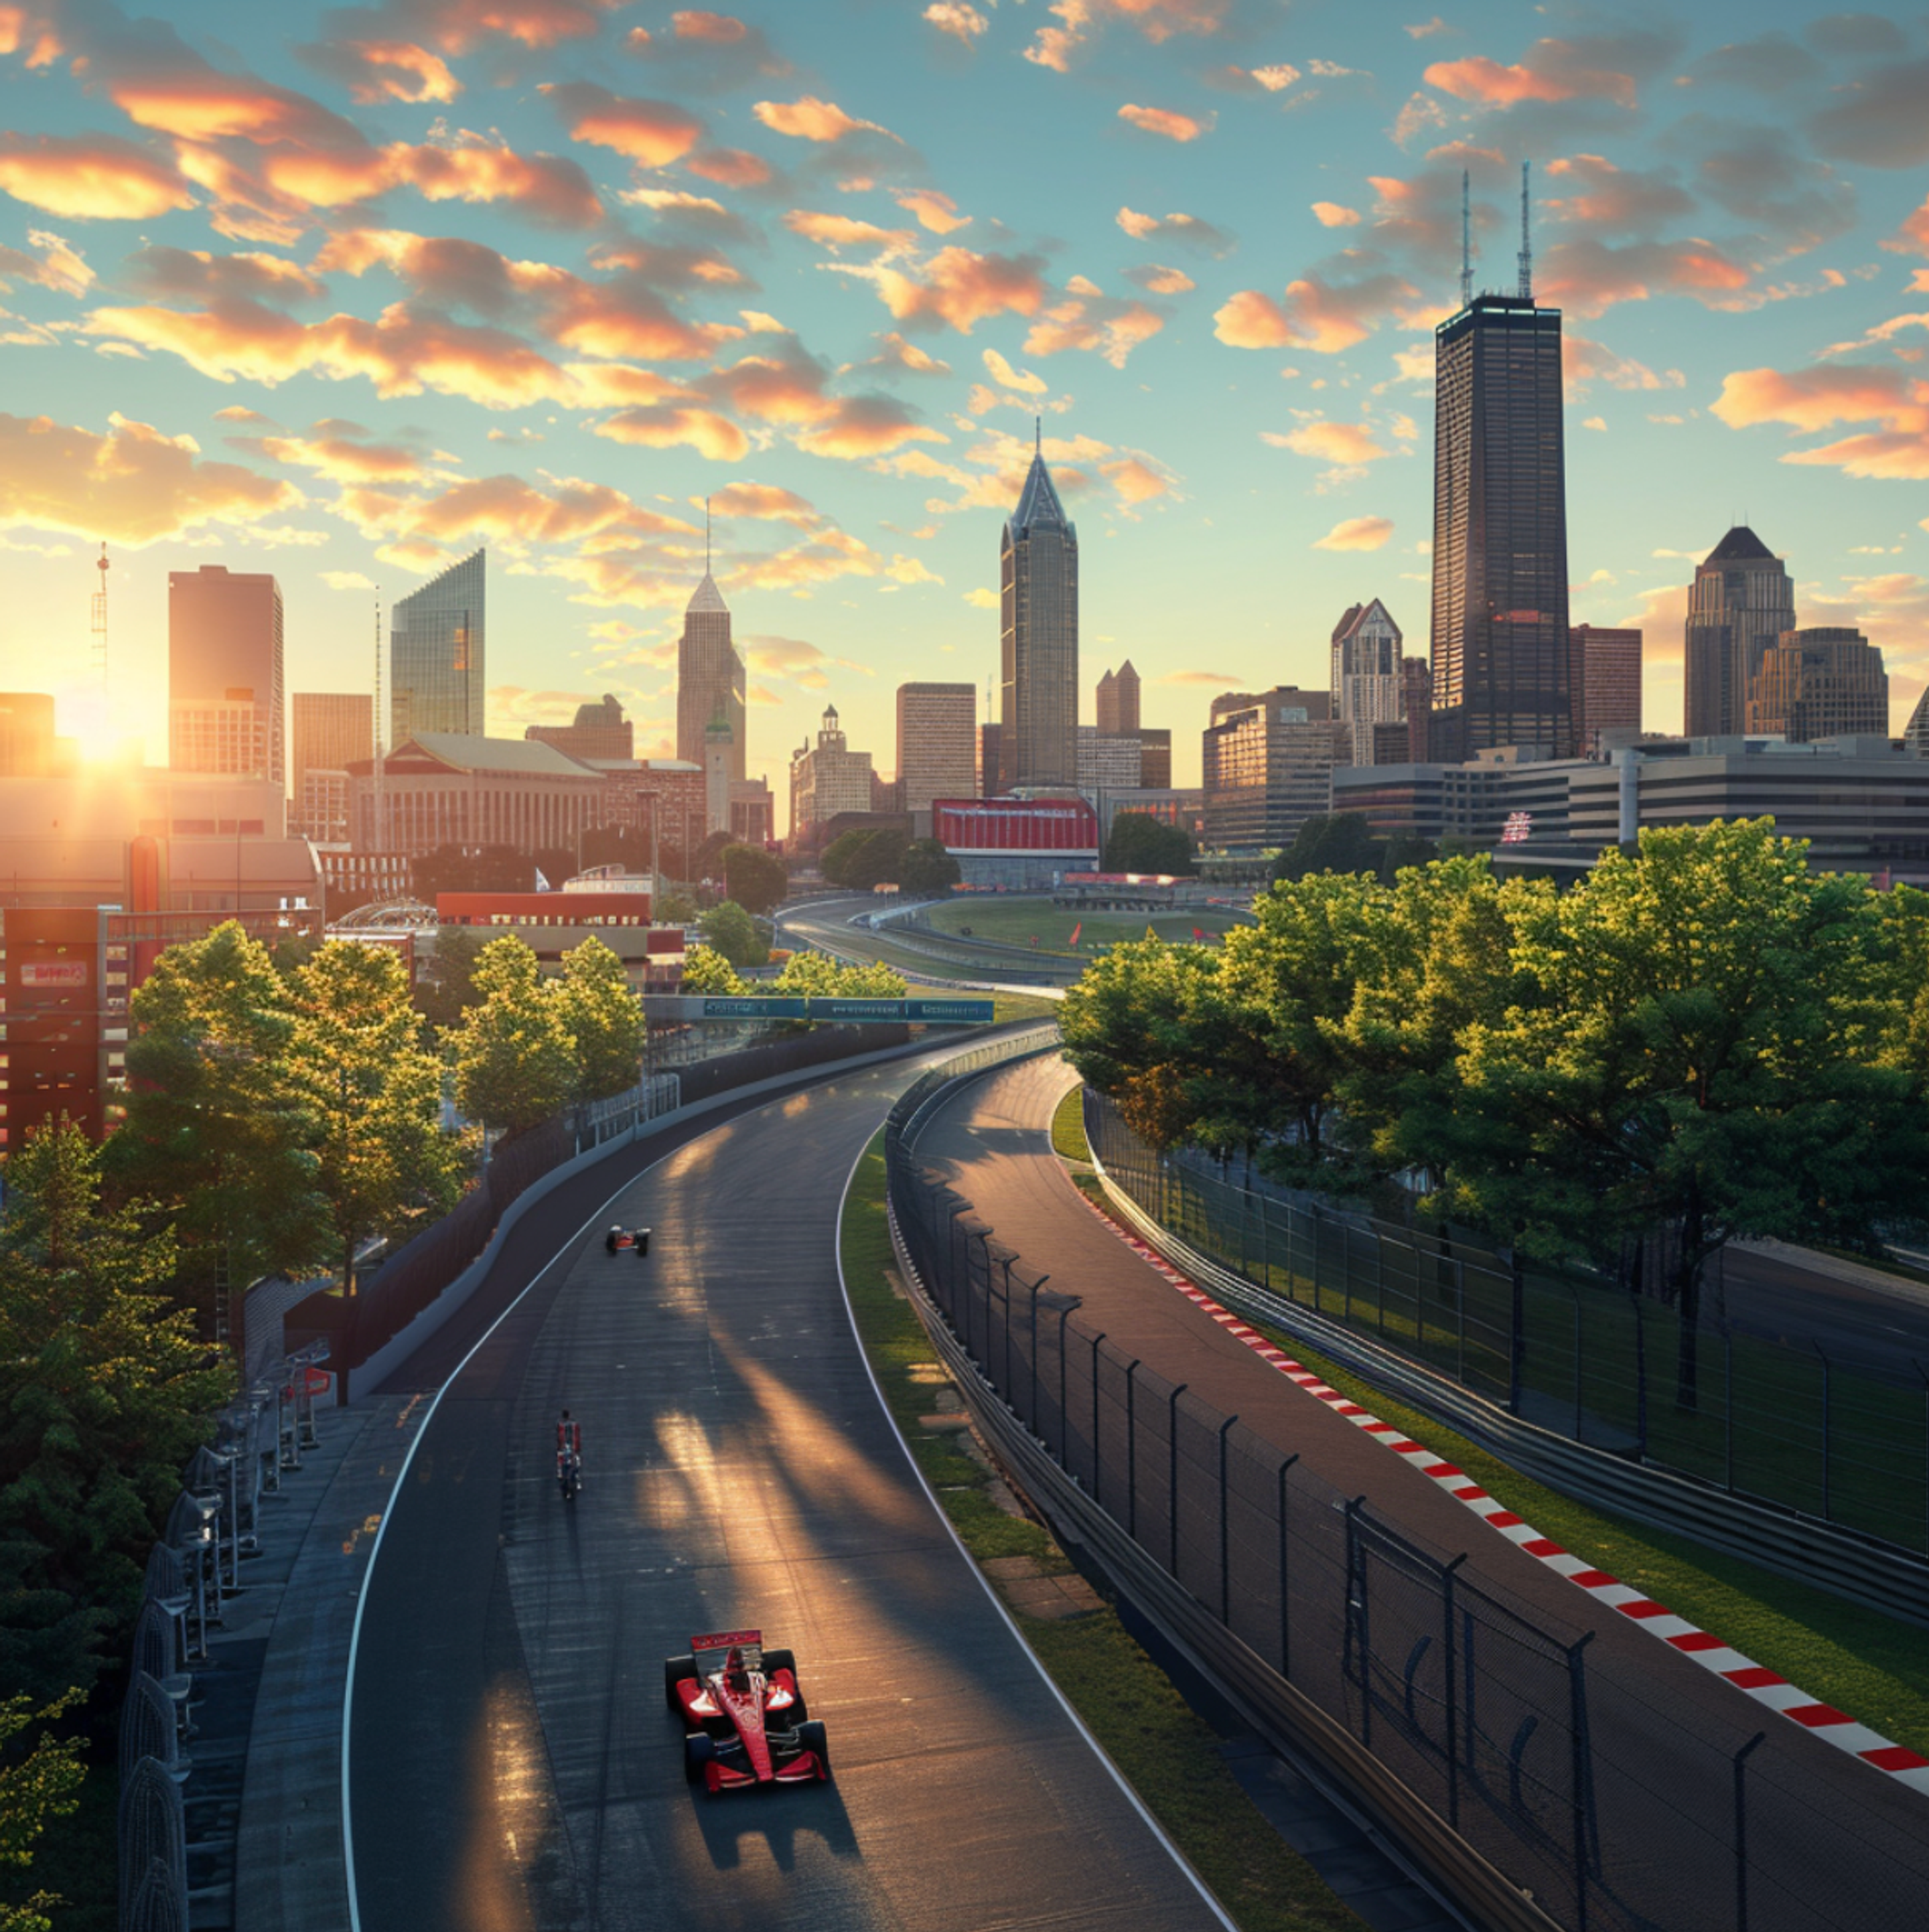 Dawn at the Indianapolis Motor Speedway with Formula racing cars on the track, showcasing the city’s skyline in the background bathed in the soft light of sunrise, reflecting Indianapolis's rich automotive racing heritage.